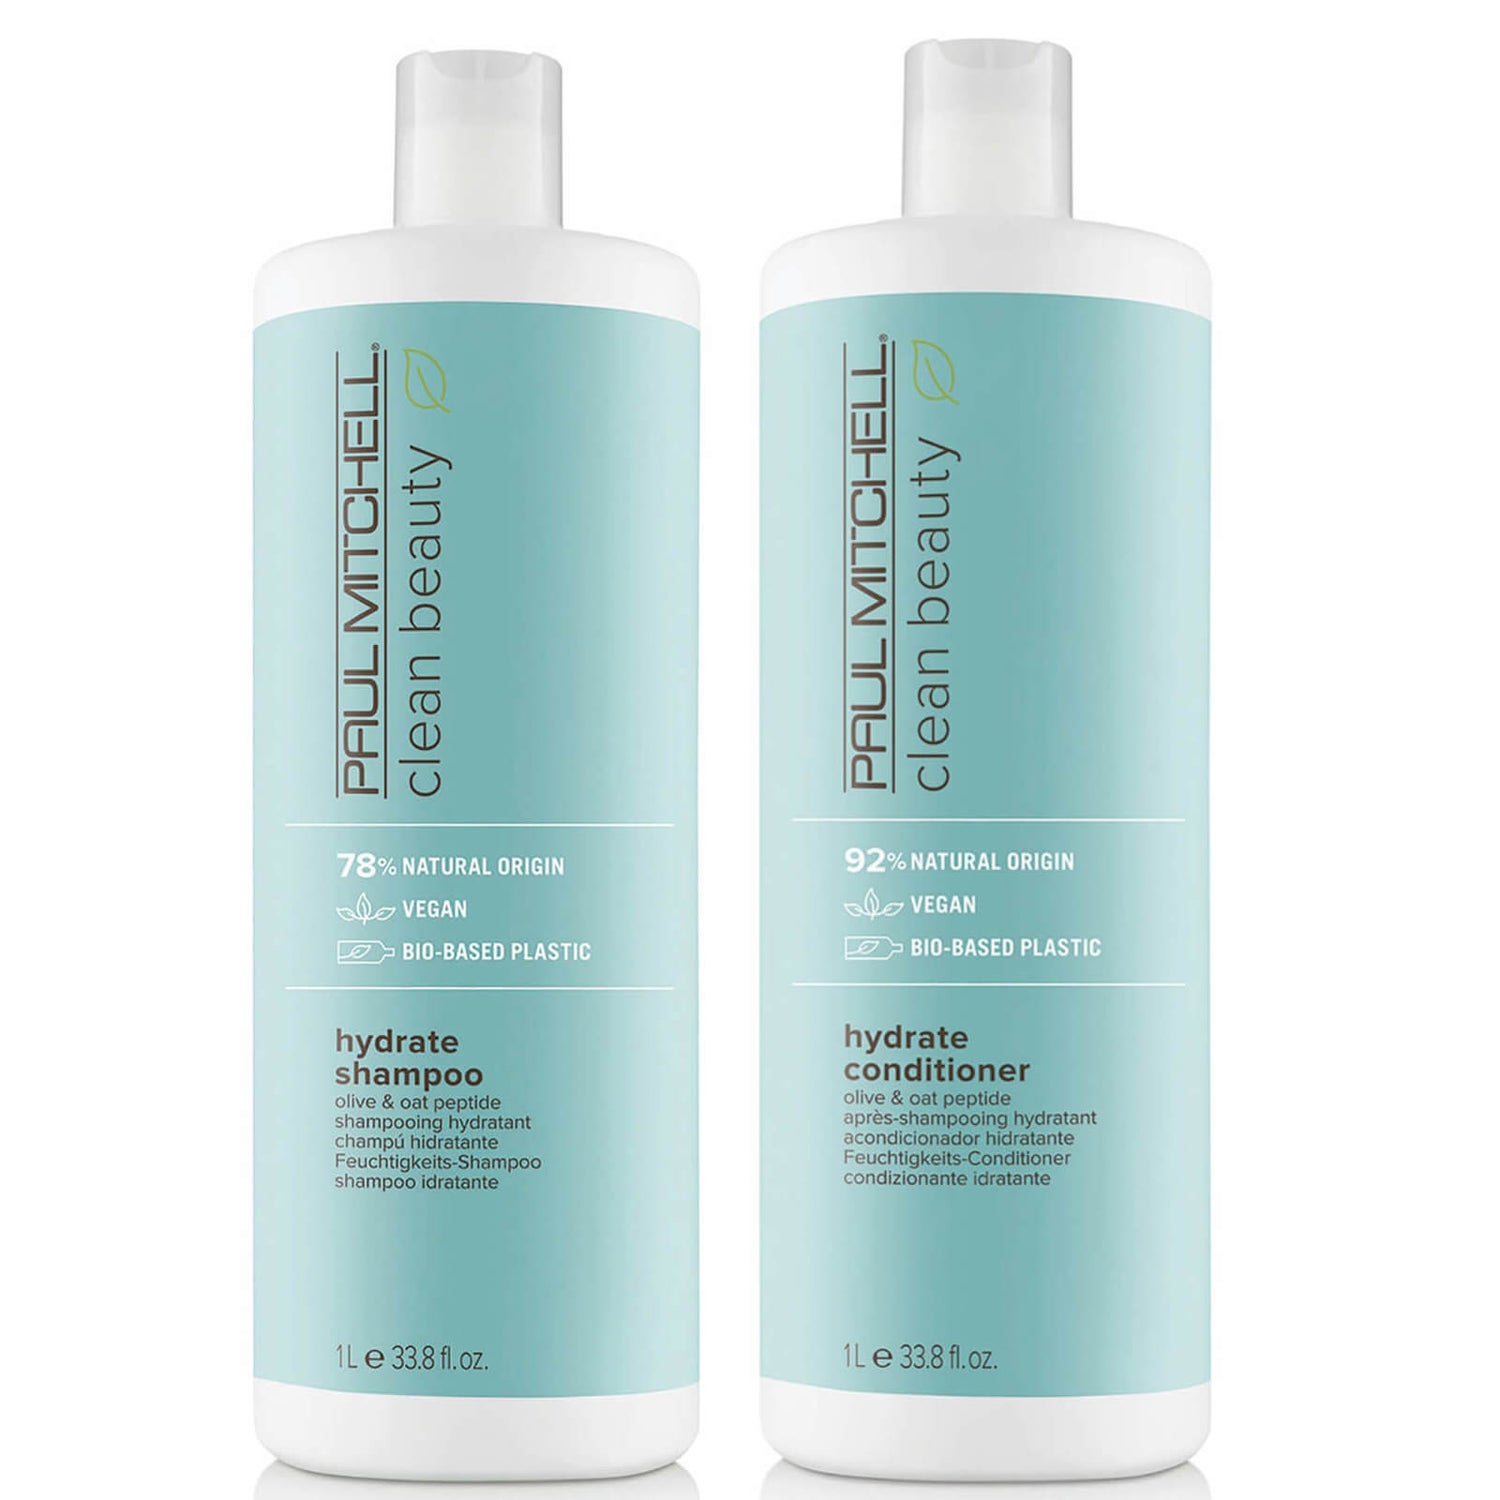 Paul Mitchell Clean Beauty Hydrate Shampoo and Conditioner Supersize Set